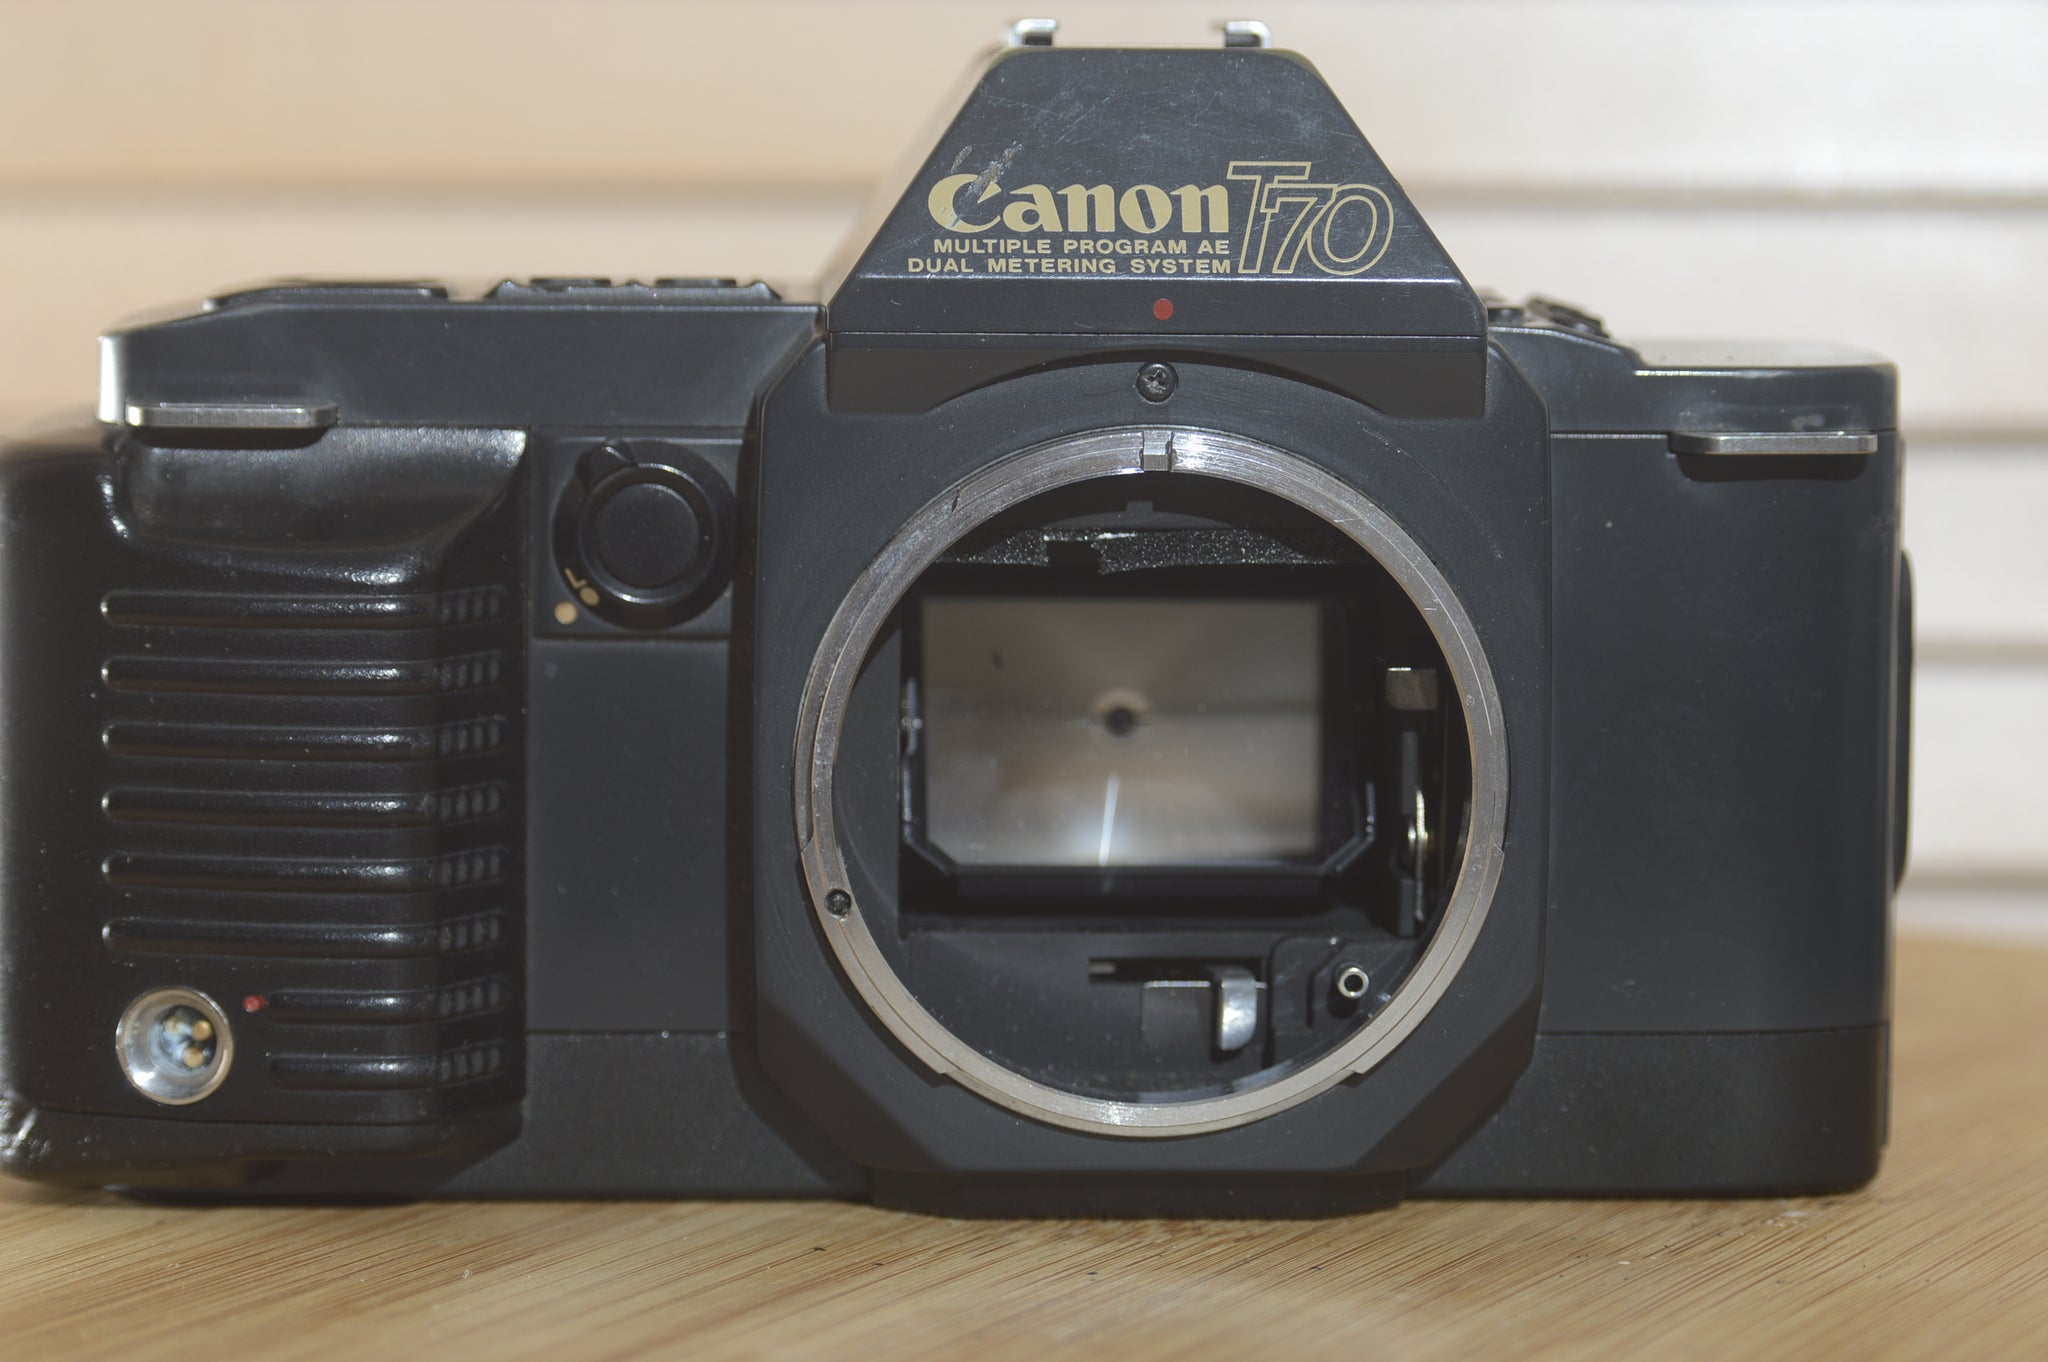 Canon T70 35mm SLR Camera. Near Mint condition, fantastic starter camera. - RewindCameras quality vintage cameras, fully tested and serviced